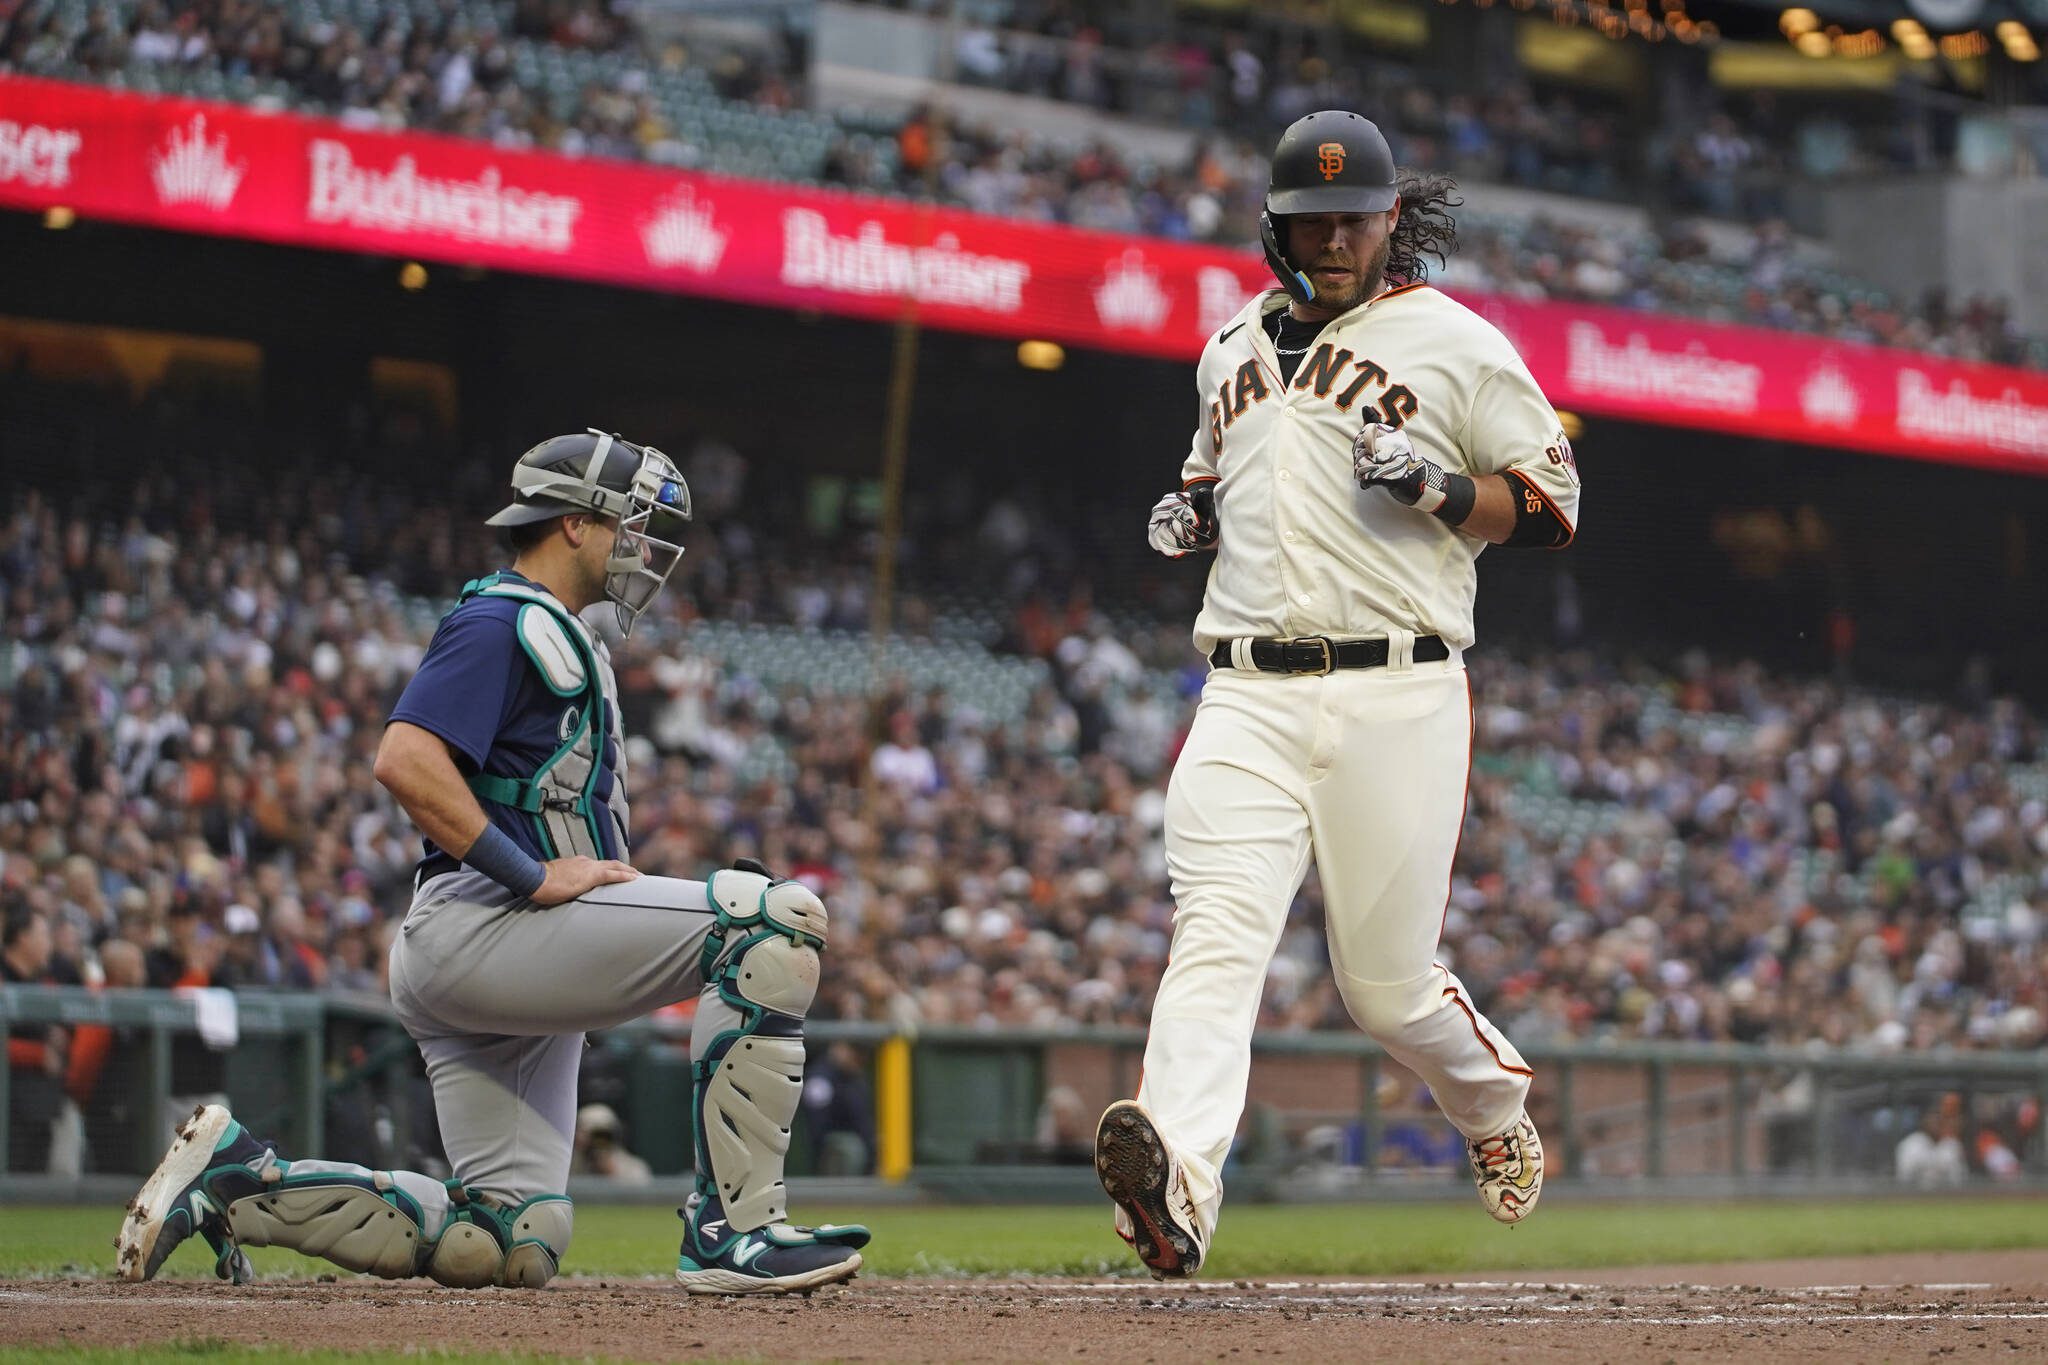 The Giants’ Brandon Crawford crosses home plate to score a run as Mariners catcher Cal Raleigh looks on in the third inning of a game on Wednesday in San Francisco. (AP Photo/Eric Risberg)